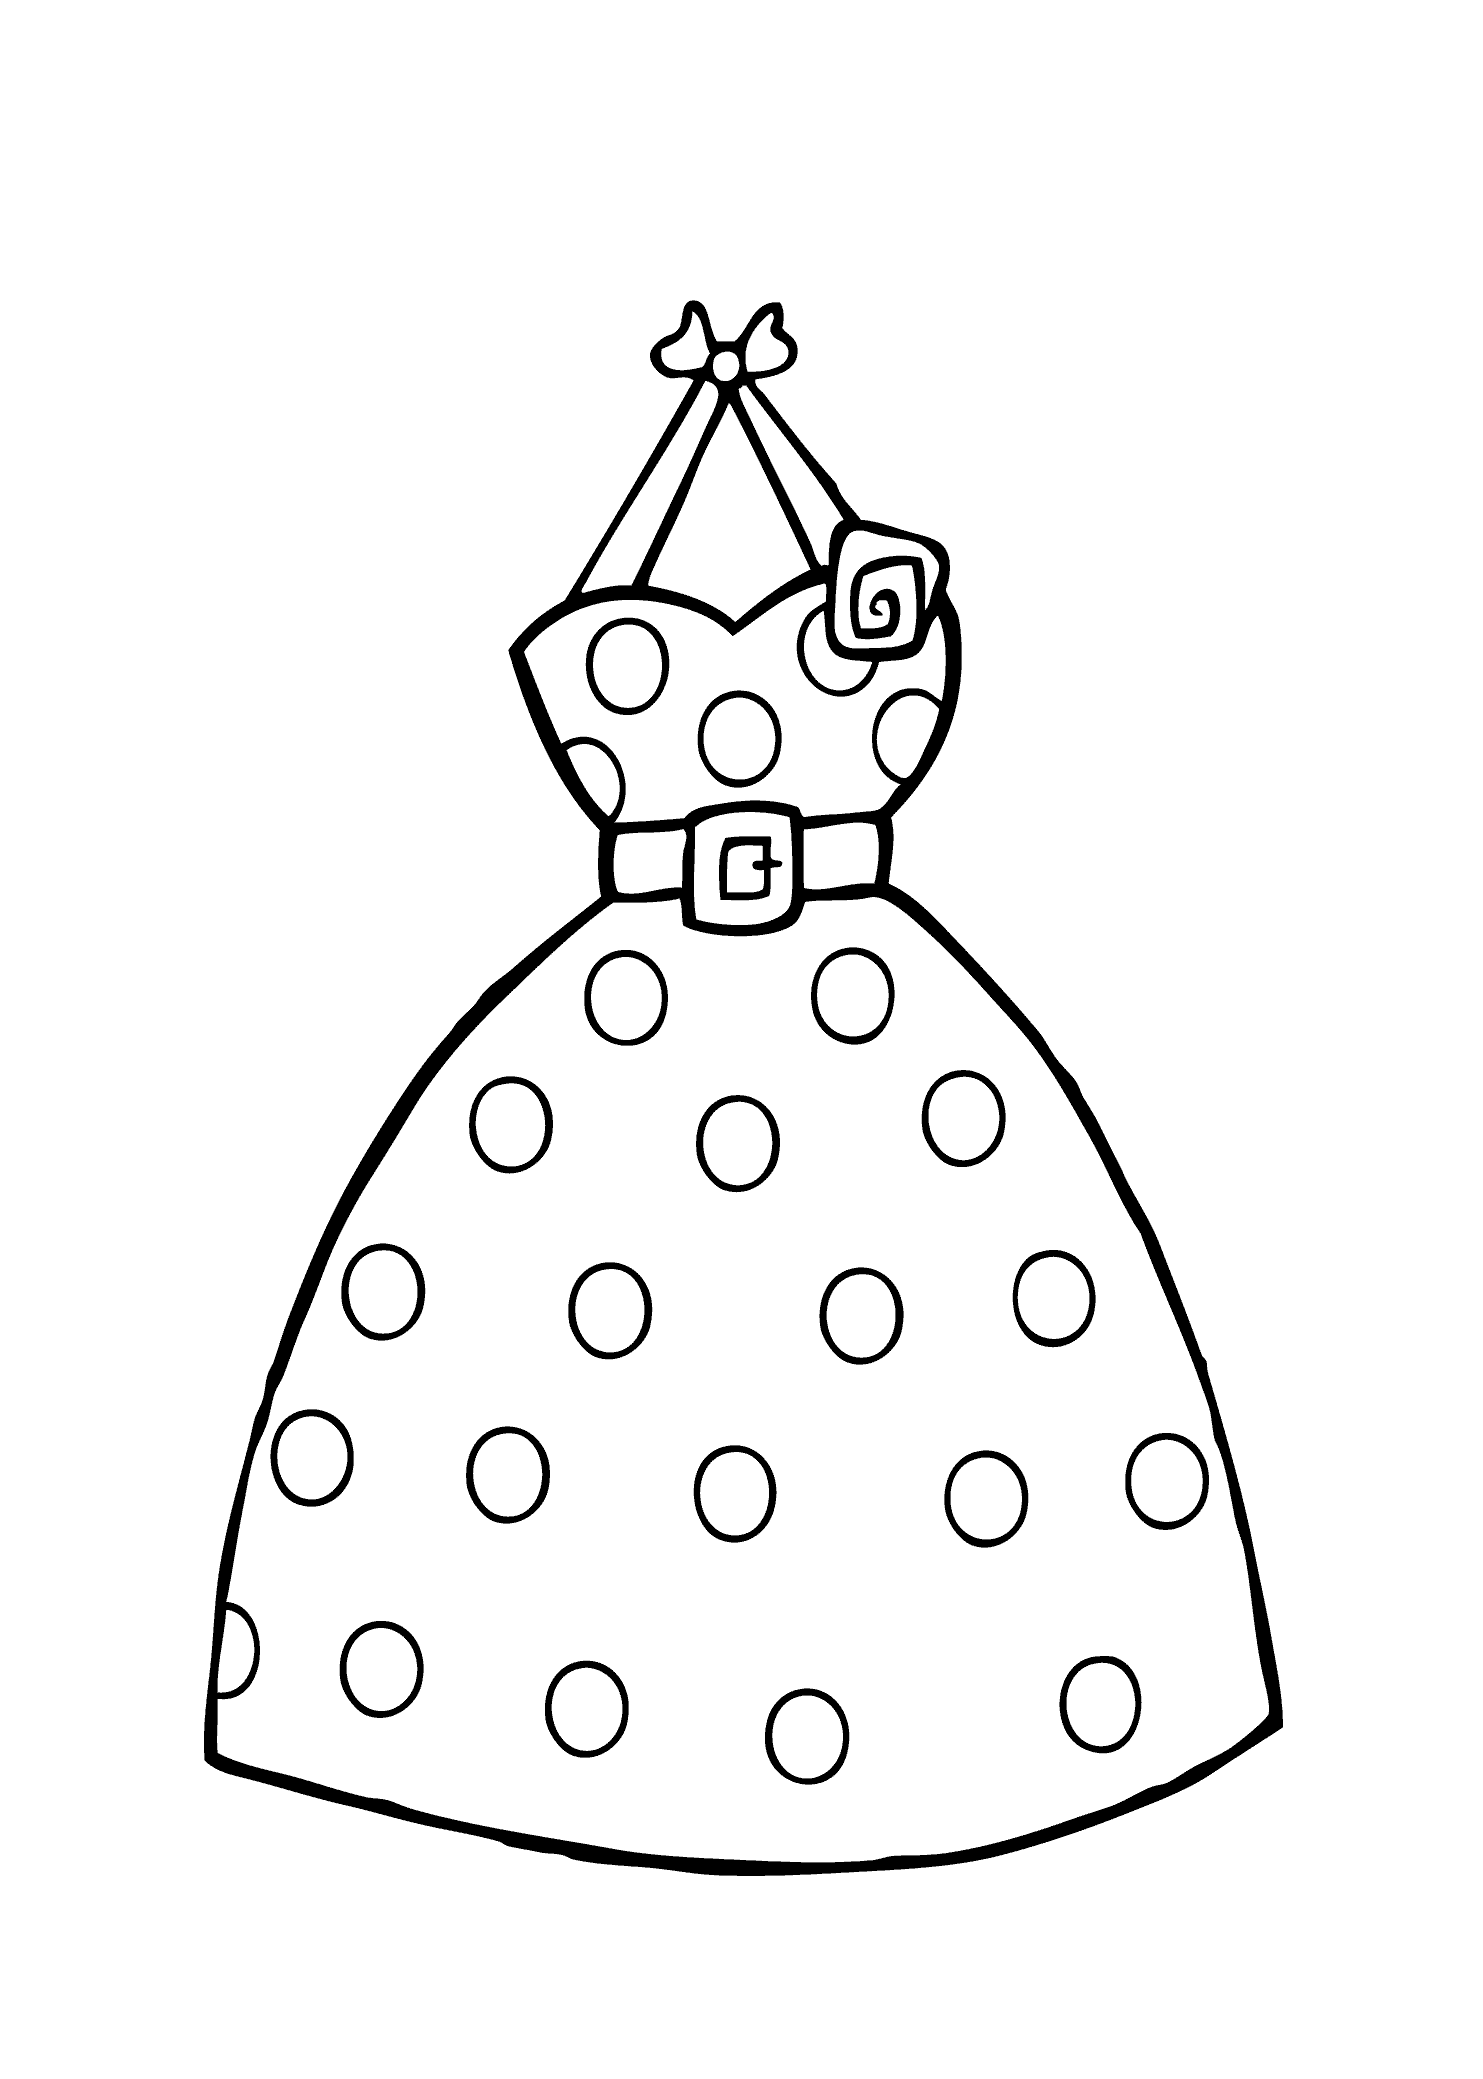 dresses coloring pages dress coloring pages to download and print for free dresses pages coloring 1 1